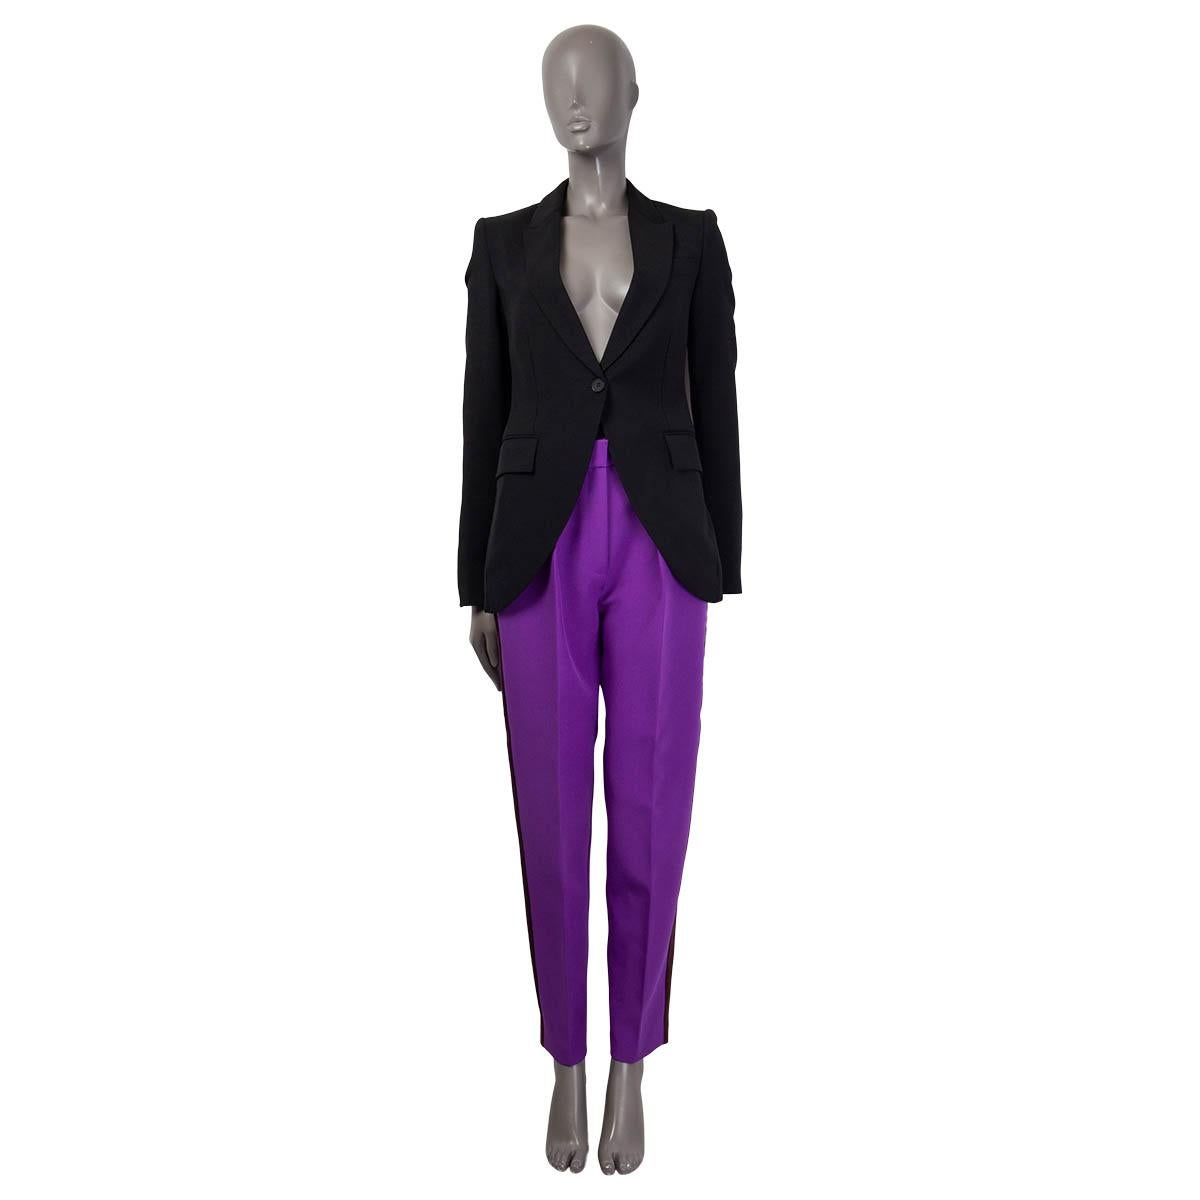 100% authentic Stella McCartney Peak Lapel Longline Fitted Blazer in black wool (80%), mohair (20%) and lined in viscose (50%) and cotton (50%). Blazer closes with one button and has a rounded cropped front. Features two flap pockets and one chest